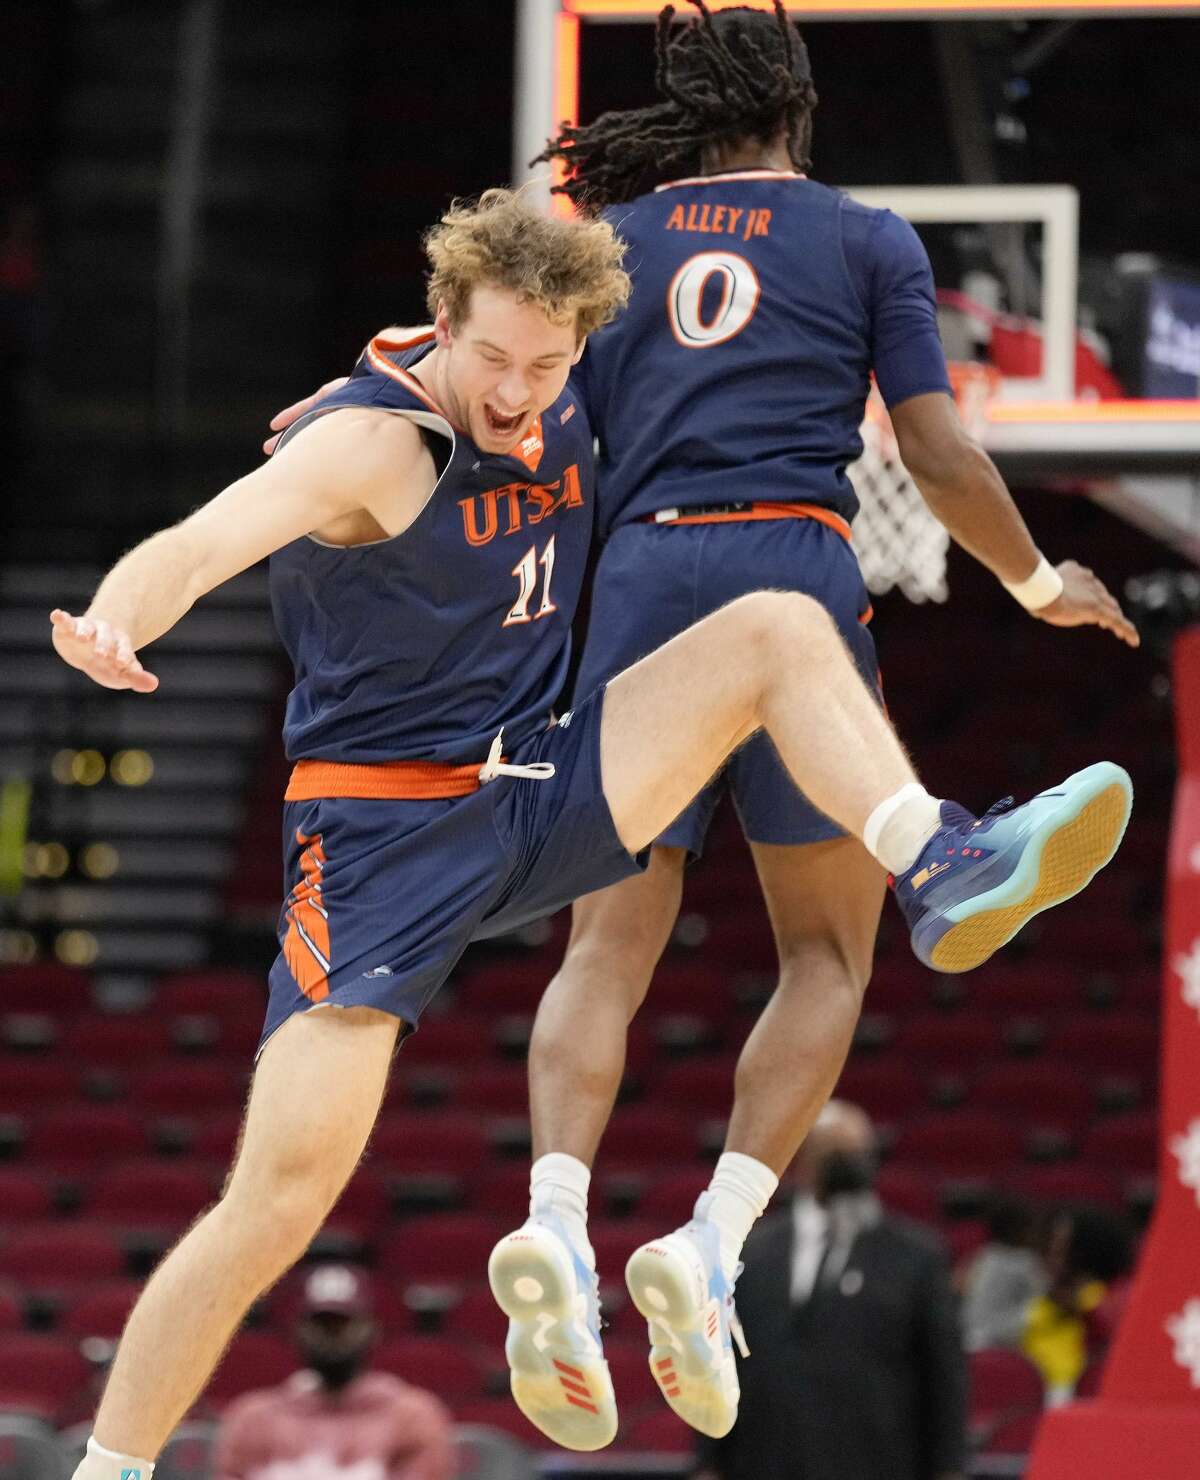 UTSA's Lachlan Bofinger (11) and Cedrick Alley Jr. celebrate the team's win over Sam Houston State in an NCAA college basketball game, Saturday, Dec. 11, 2021, in Houston.